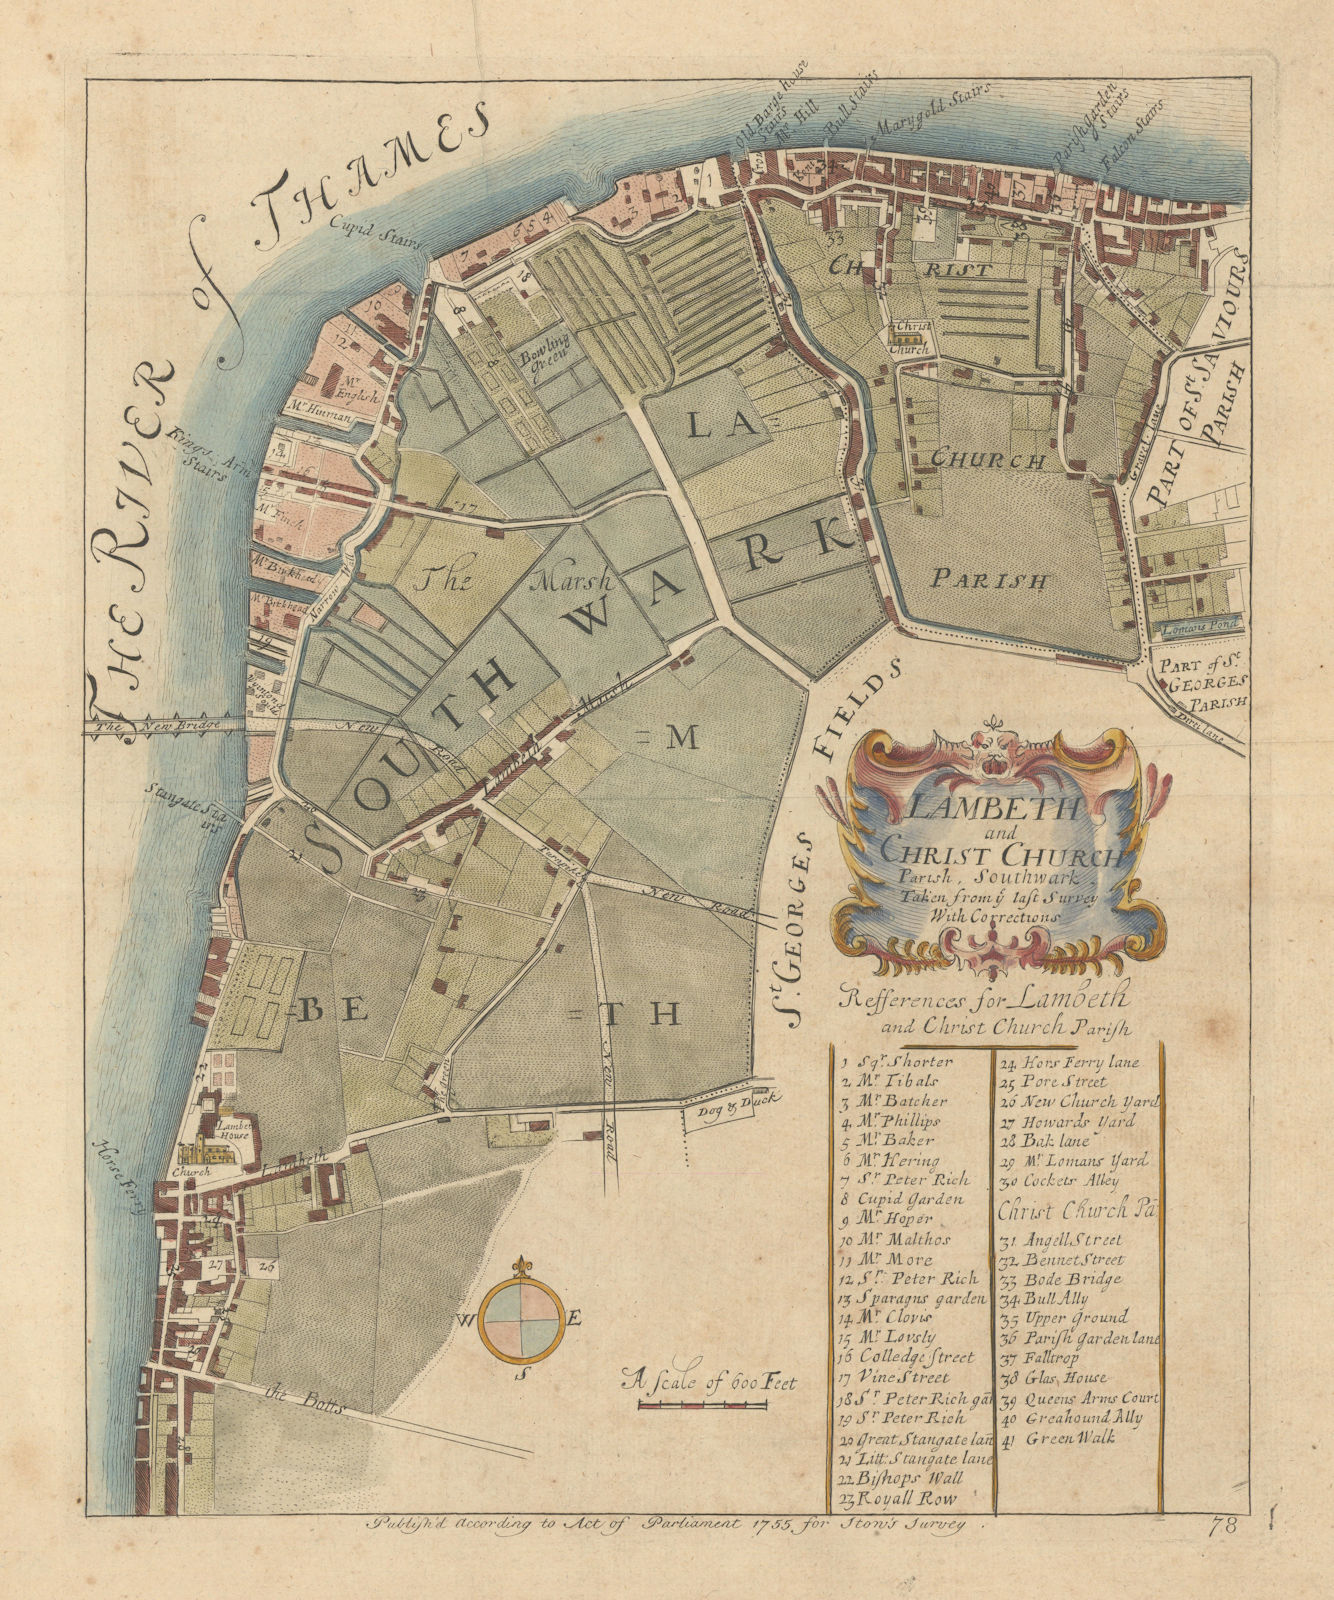 Associate Product 'Lambeth and Christ Church parish, Southwark'. Bankside. STOW/STRYPE 1755 map